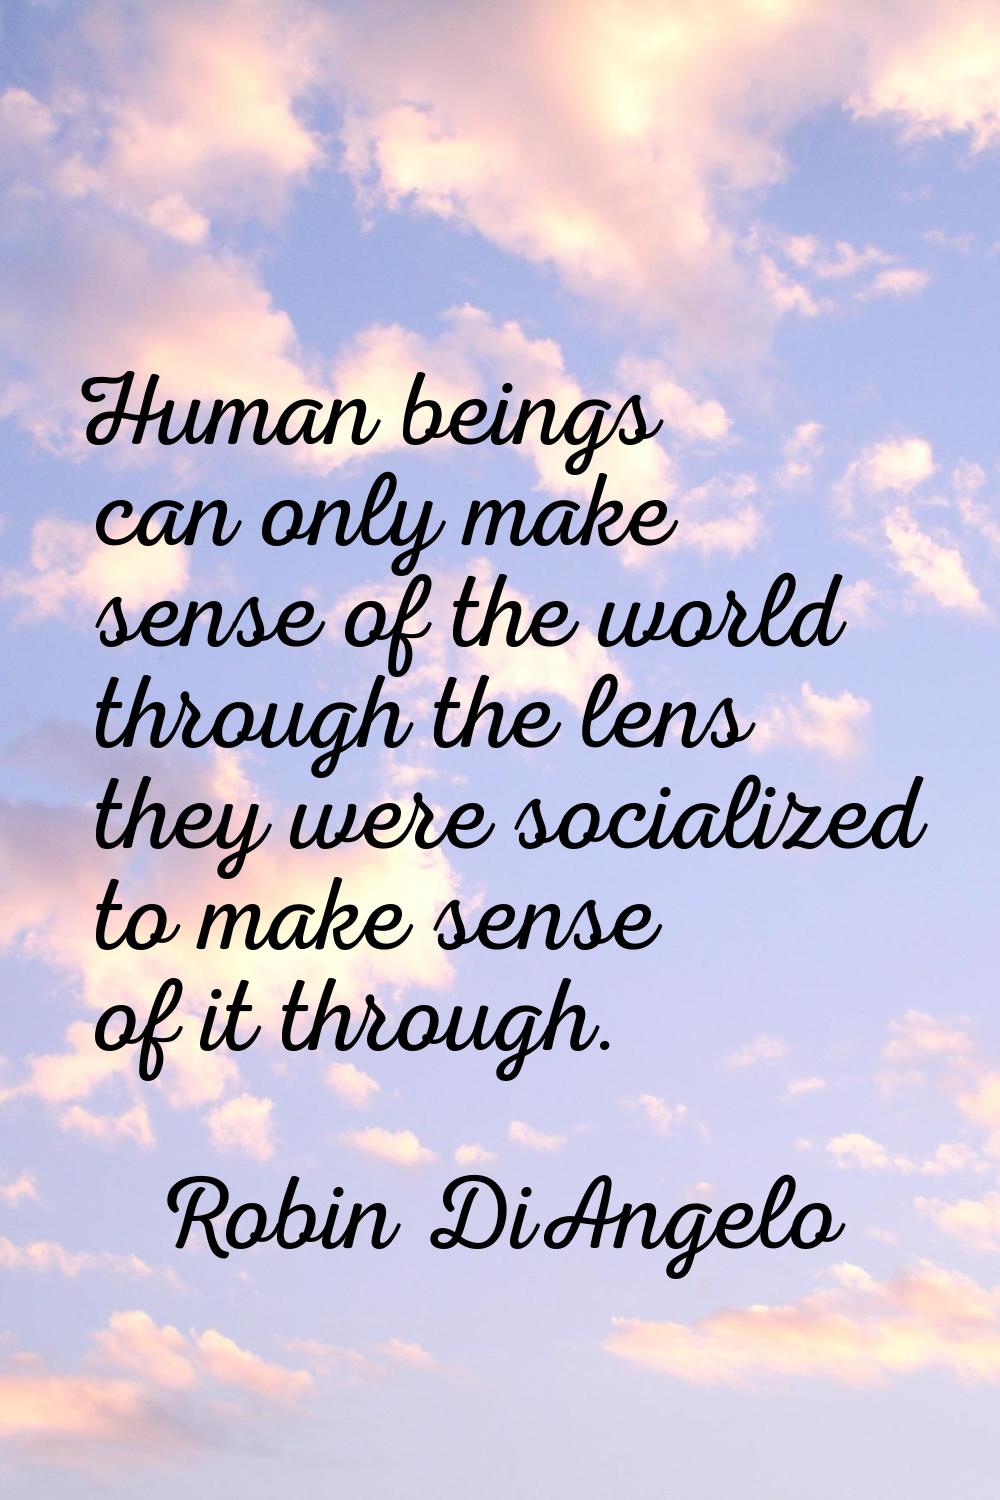 Human beings can only make sense of the world through the lens they were socialized to make sense o